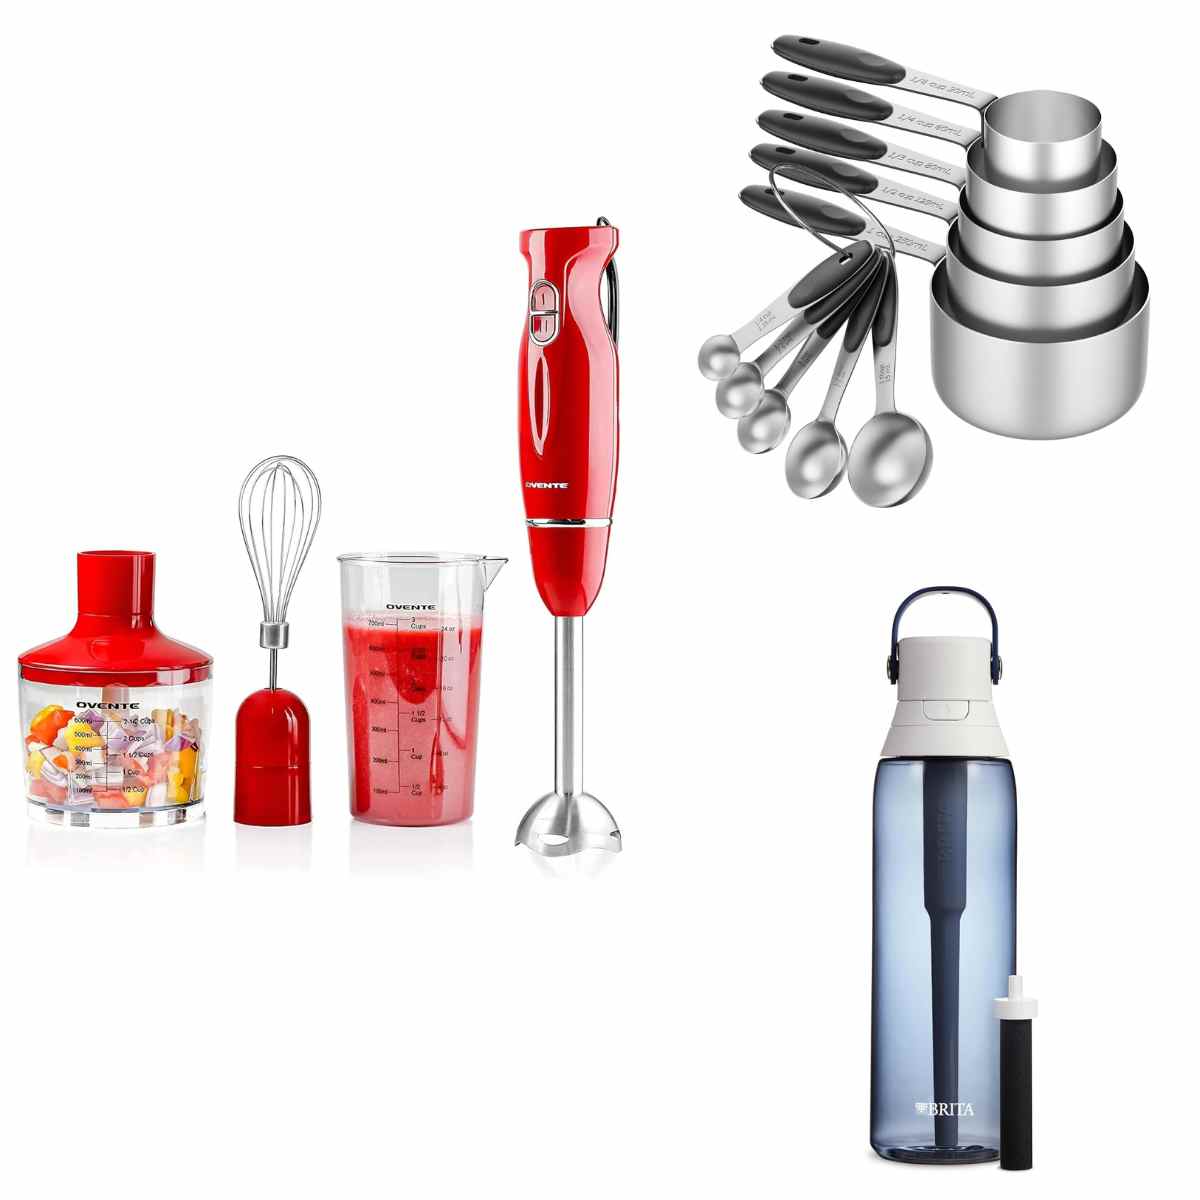 Brita Insulated Filtered Water Bottle with Straw, $12+, 10-Piece Stainless  Steel Measuring Cups and Spoons, $8+, Immersion Electric Hand Blender Set,  $19+